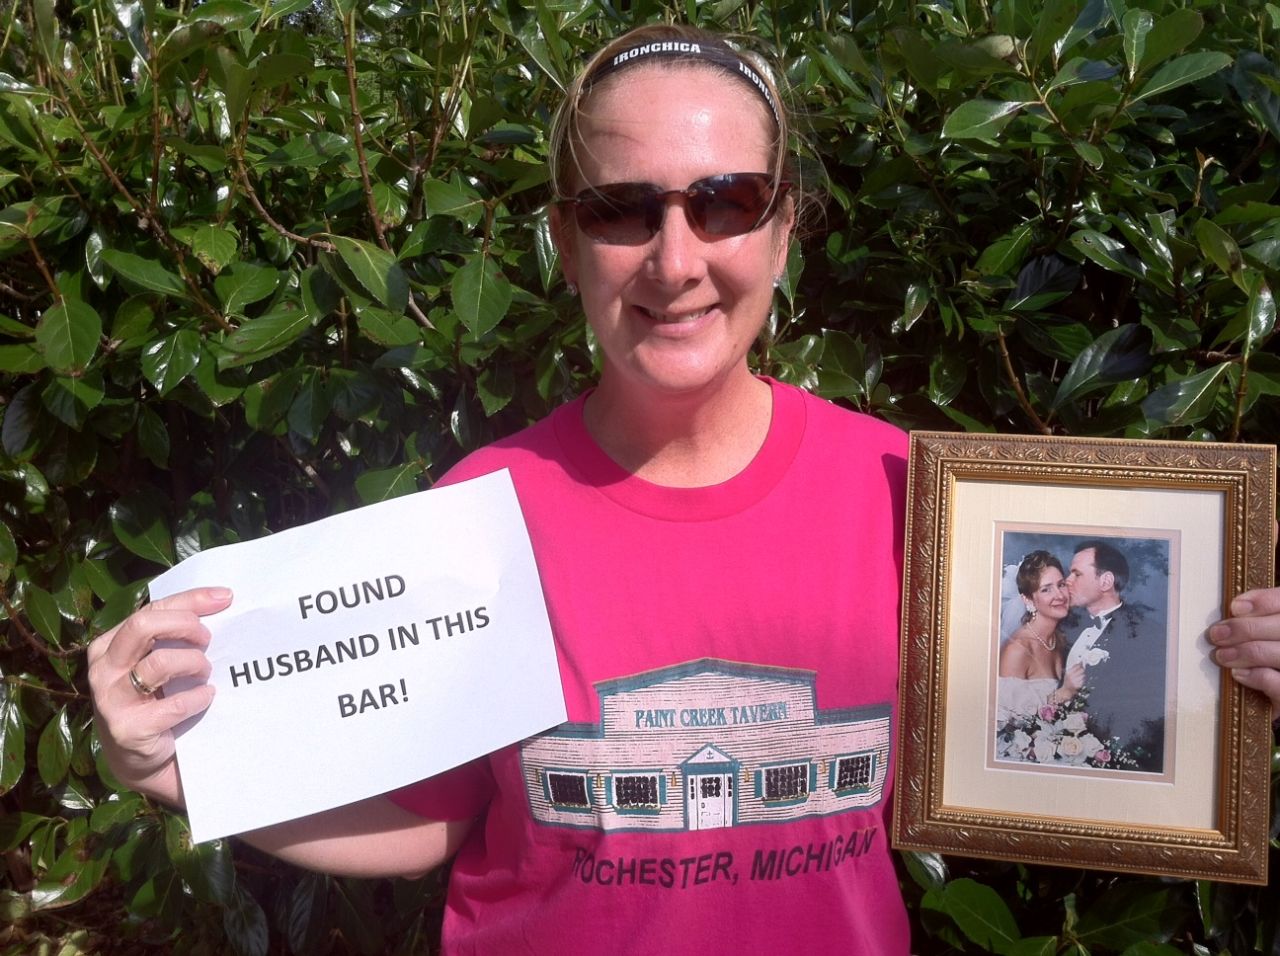 <a href="http://ireport.cnn.com/docs/DOC-928249">Cynthia Falardeau's</a> favorite T-shirt has a picture of the Michigan dive bar she met her husband at 22 years ago.  Despite her habit of donating old clothes, she kept this shirt around for 17 years, storing it safely in her closet. 